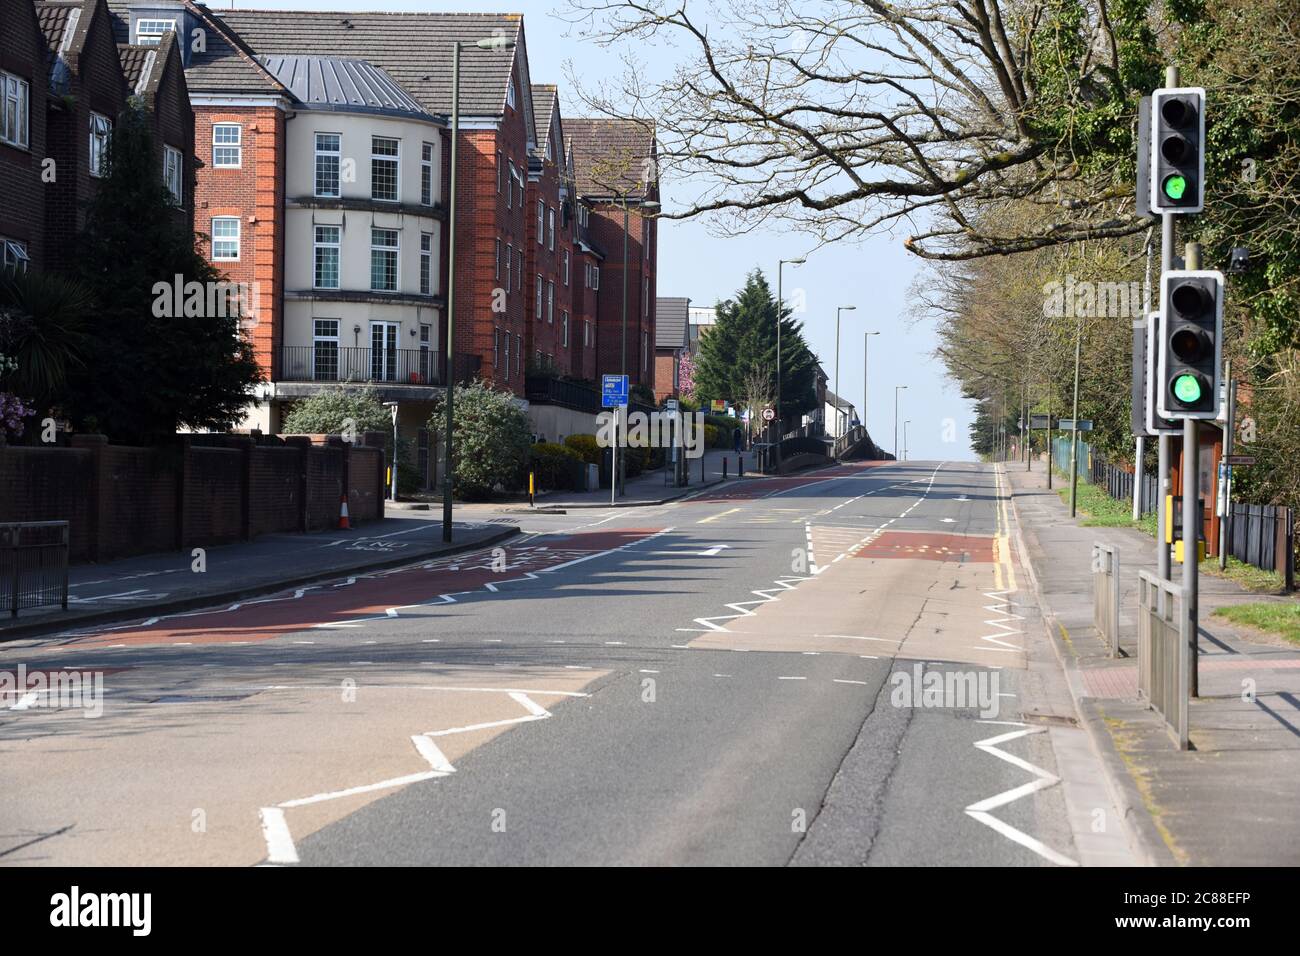 Camberley, Surrey, UK - 10 April 2020: Empty roads during the first COVID-19 lockdown of 2020 Stock Photo